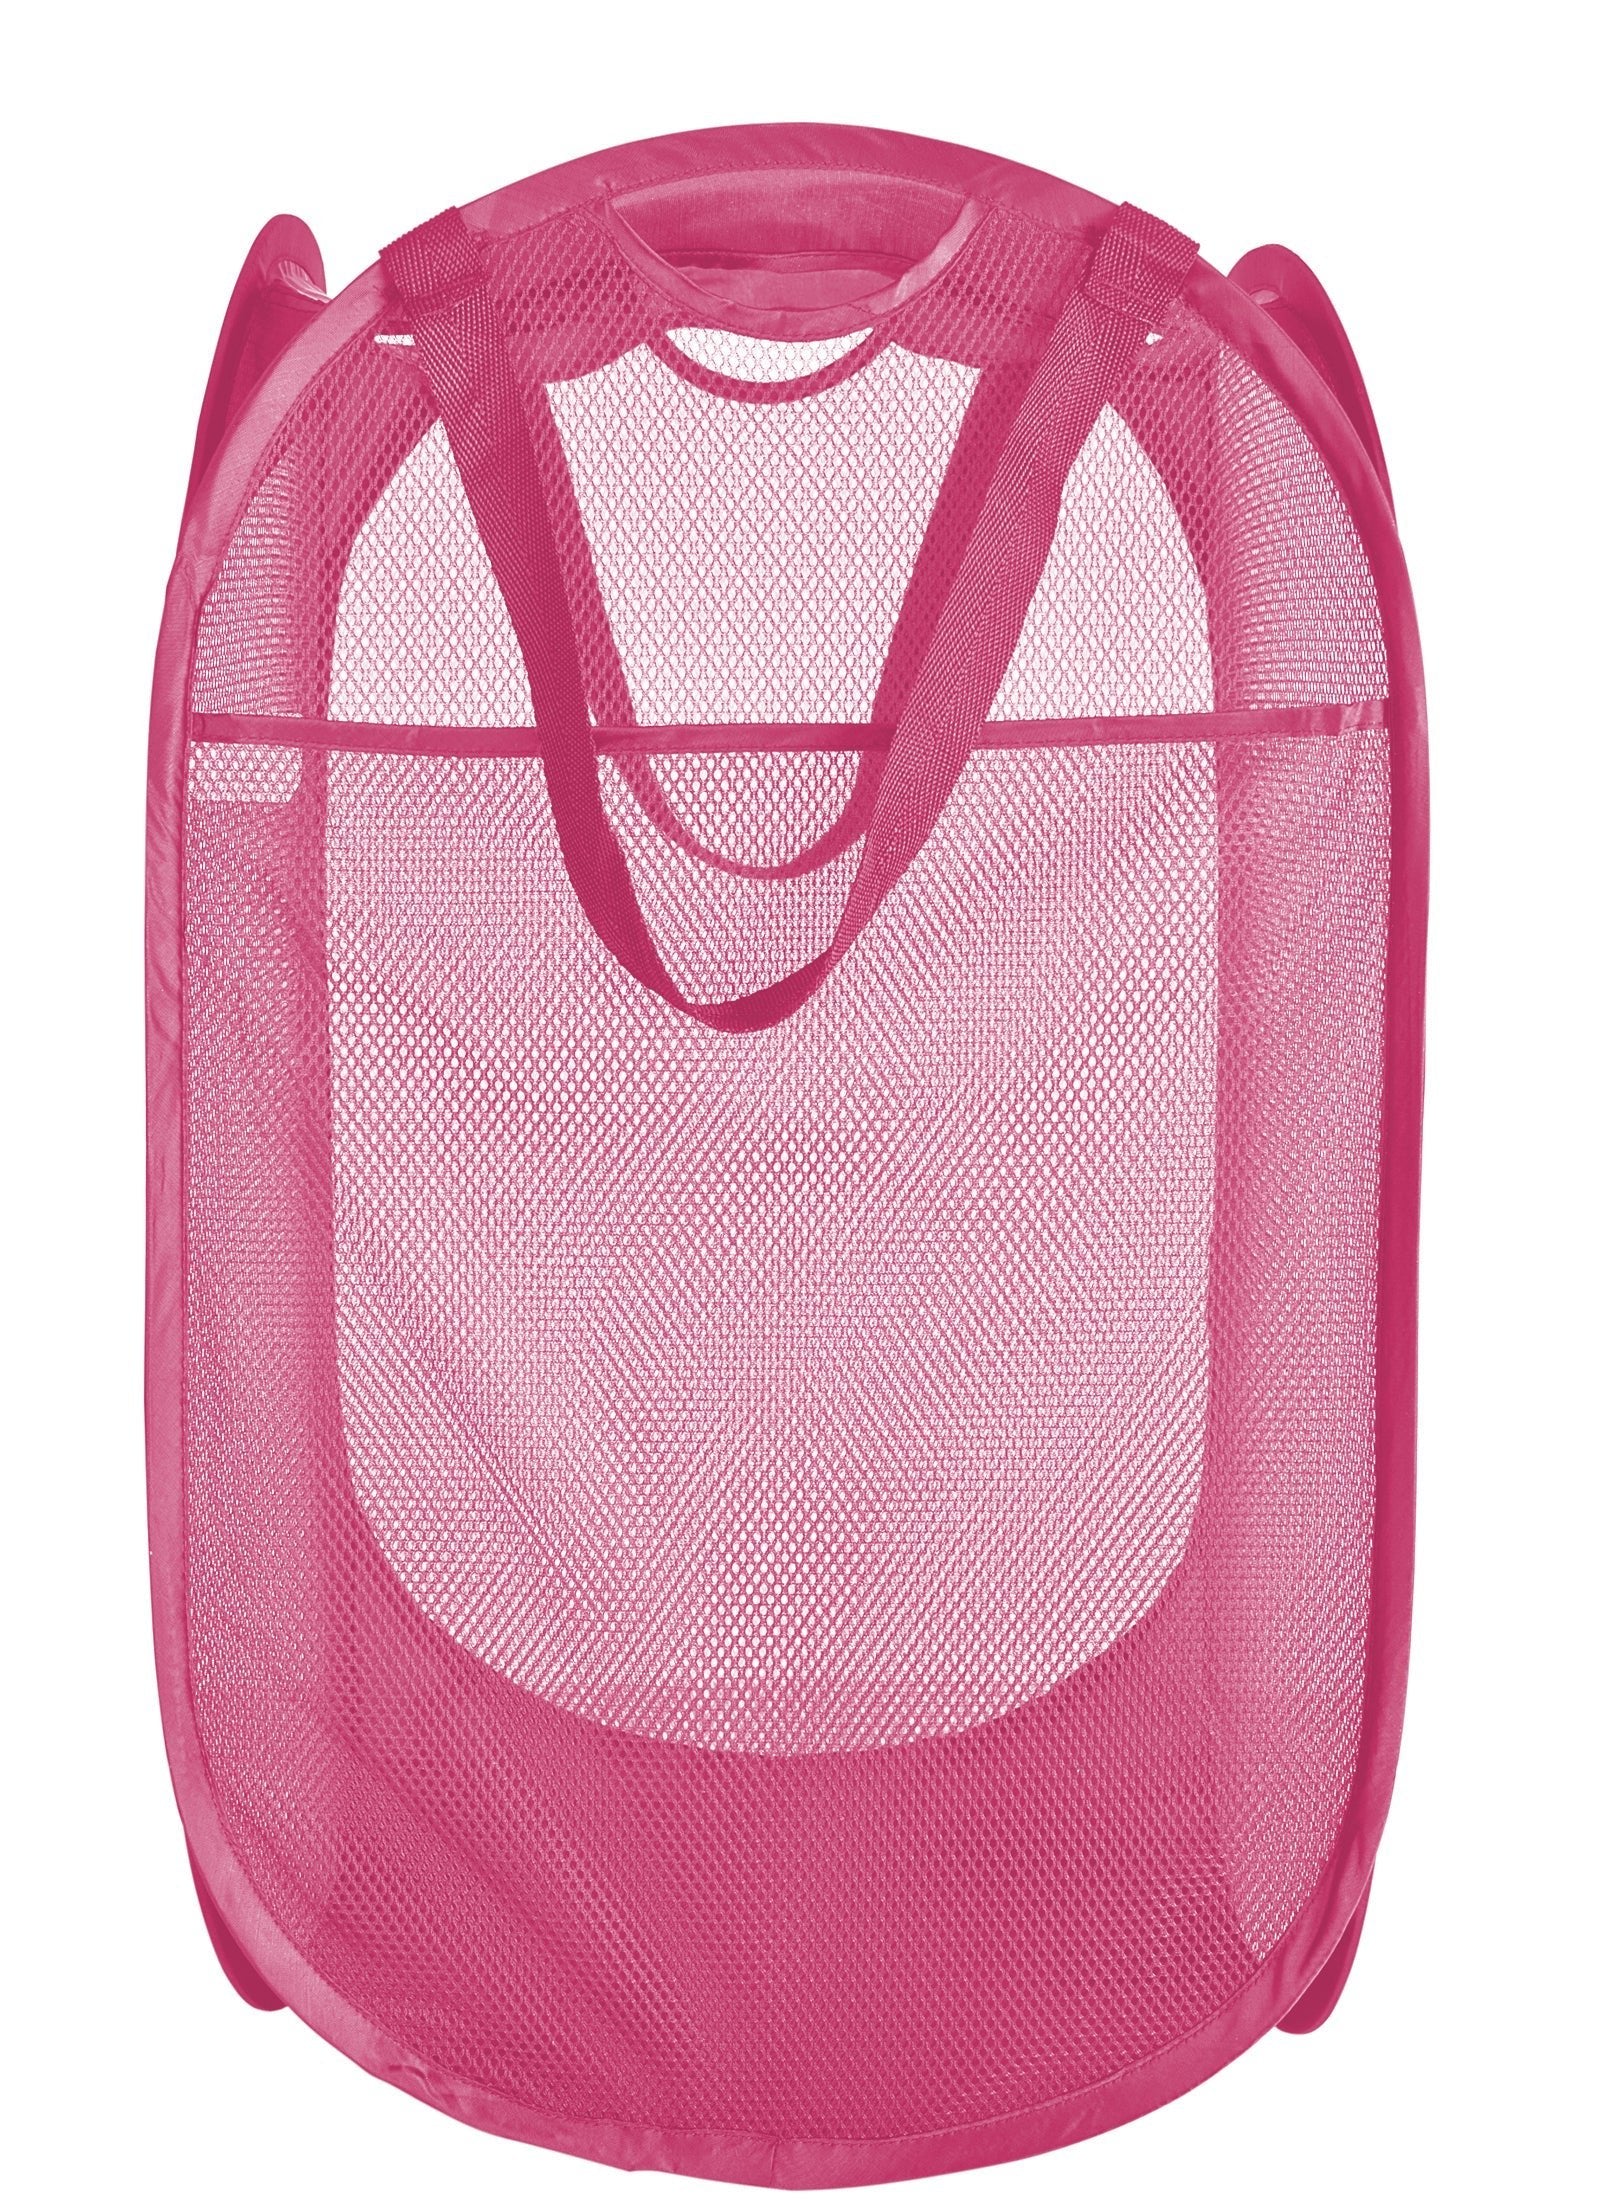 Deluxe Mesh Pop Up Square Laundry Hamper with Side Pocket and Handles - VentilAir Fabric Collapsible Design - Smart Design 2